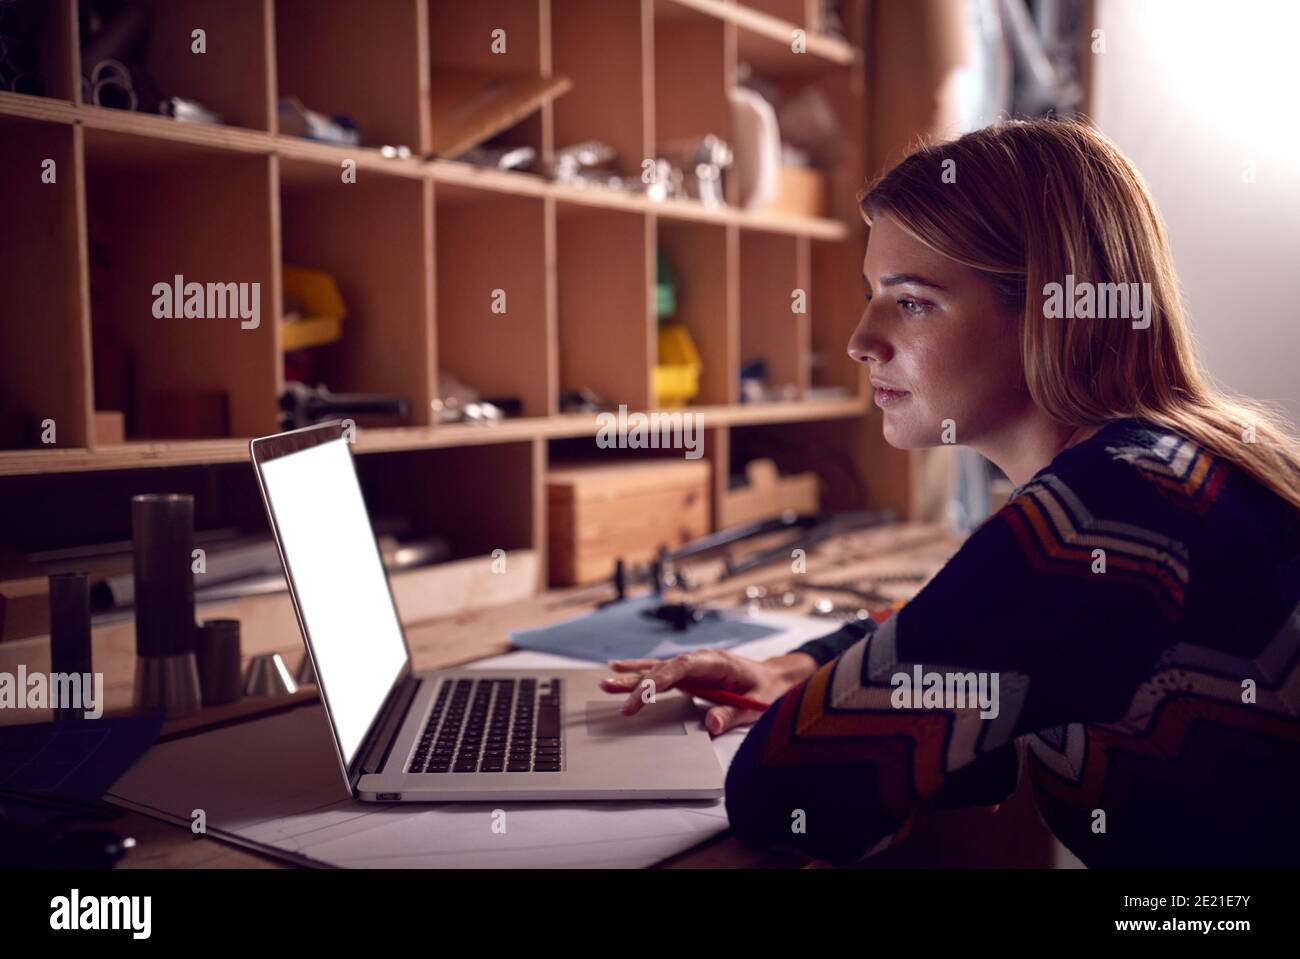 Female Business Owner Working Late In Carpentry Workshop Using Laptop Stock Photo